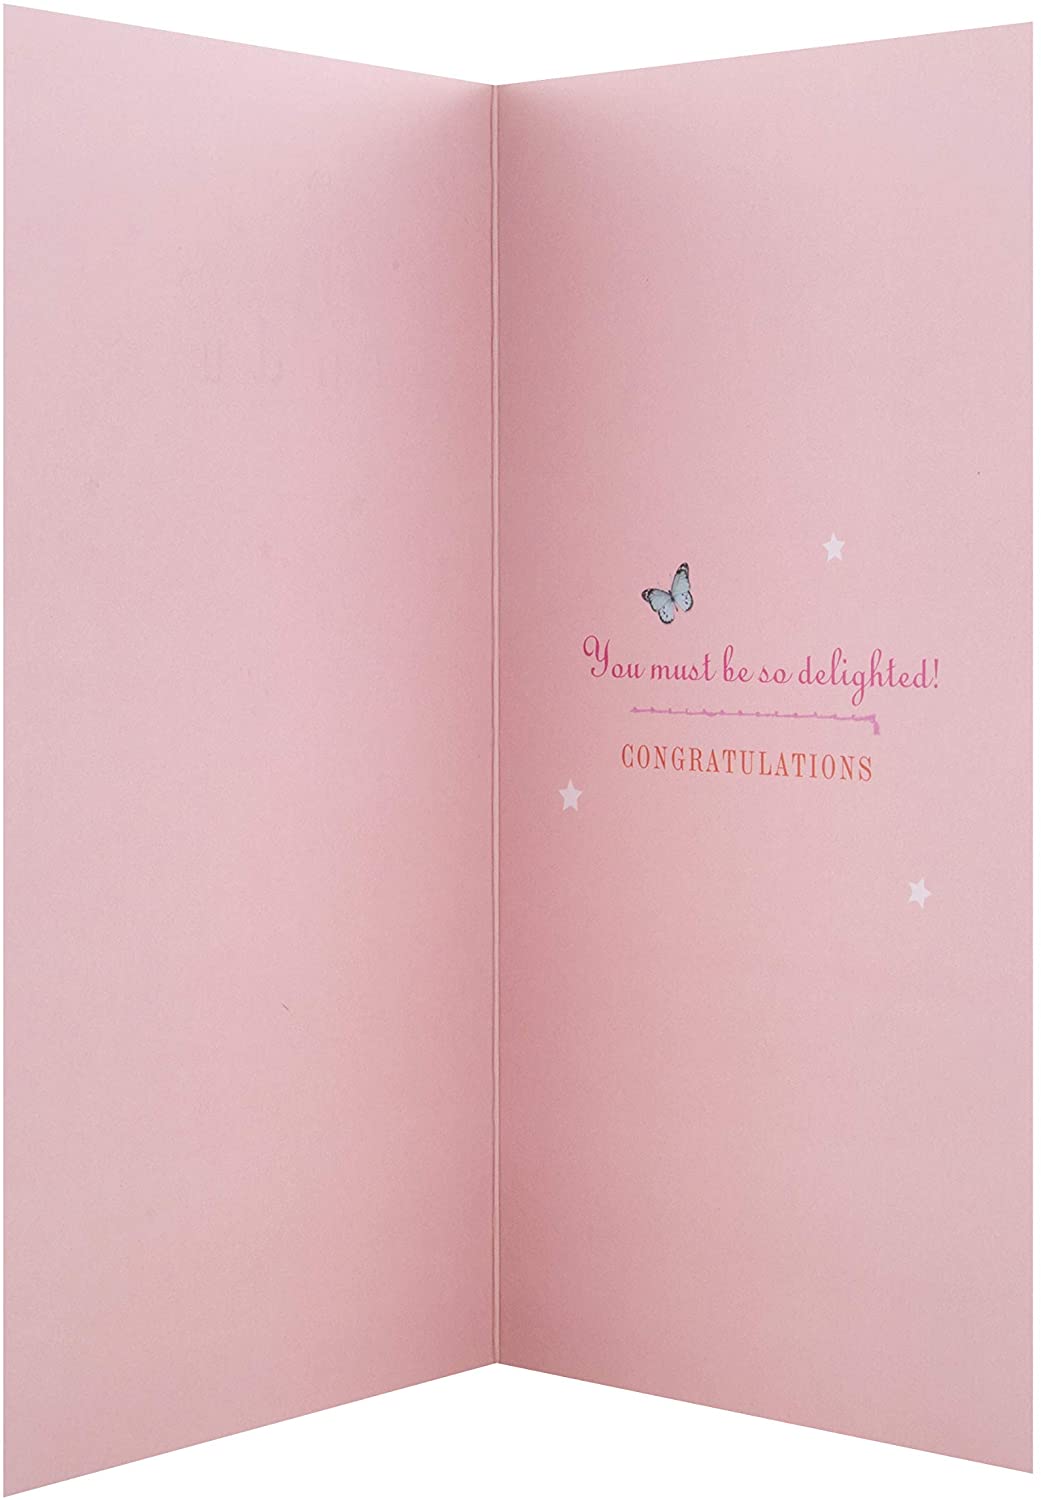 New Granddaughter Birth Congratulations Card Cute Unicorn Design with Pink Foil Details and Gem Attachments